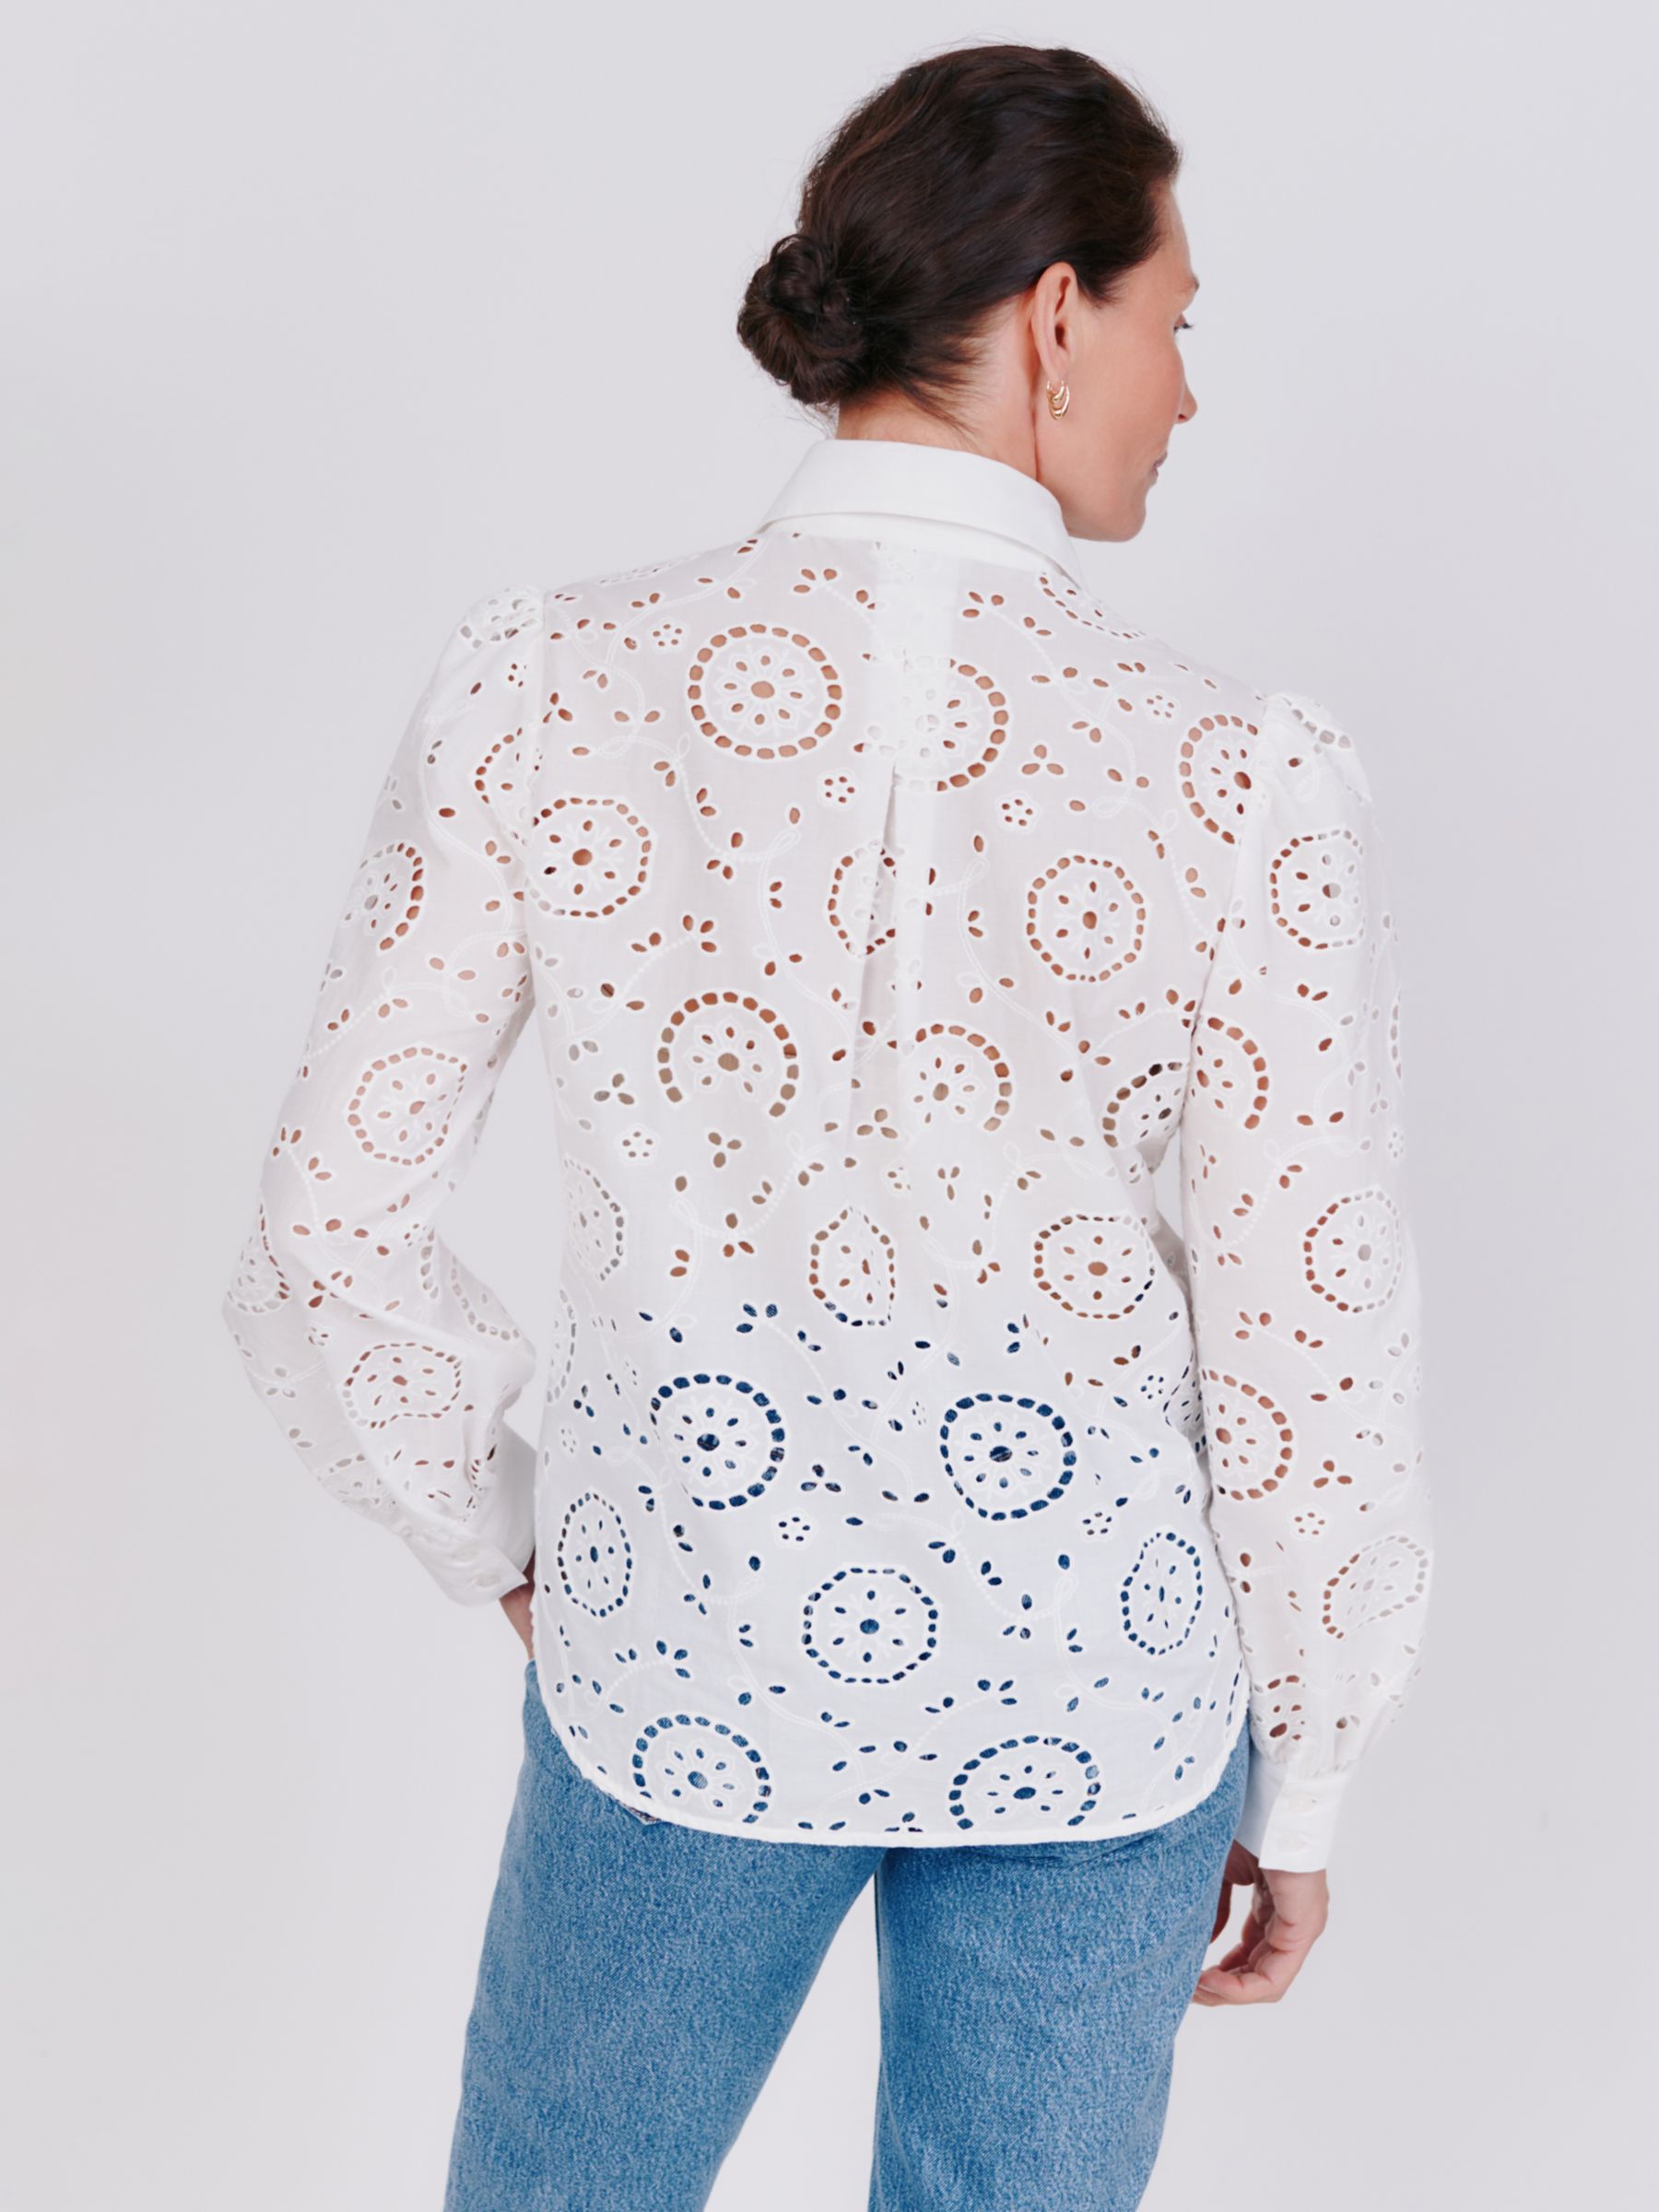 Buy Vivere By Savannah Miller Ava Broderie Anglaise Puff Sleeve Blouse, White Online at johnlewis.com